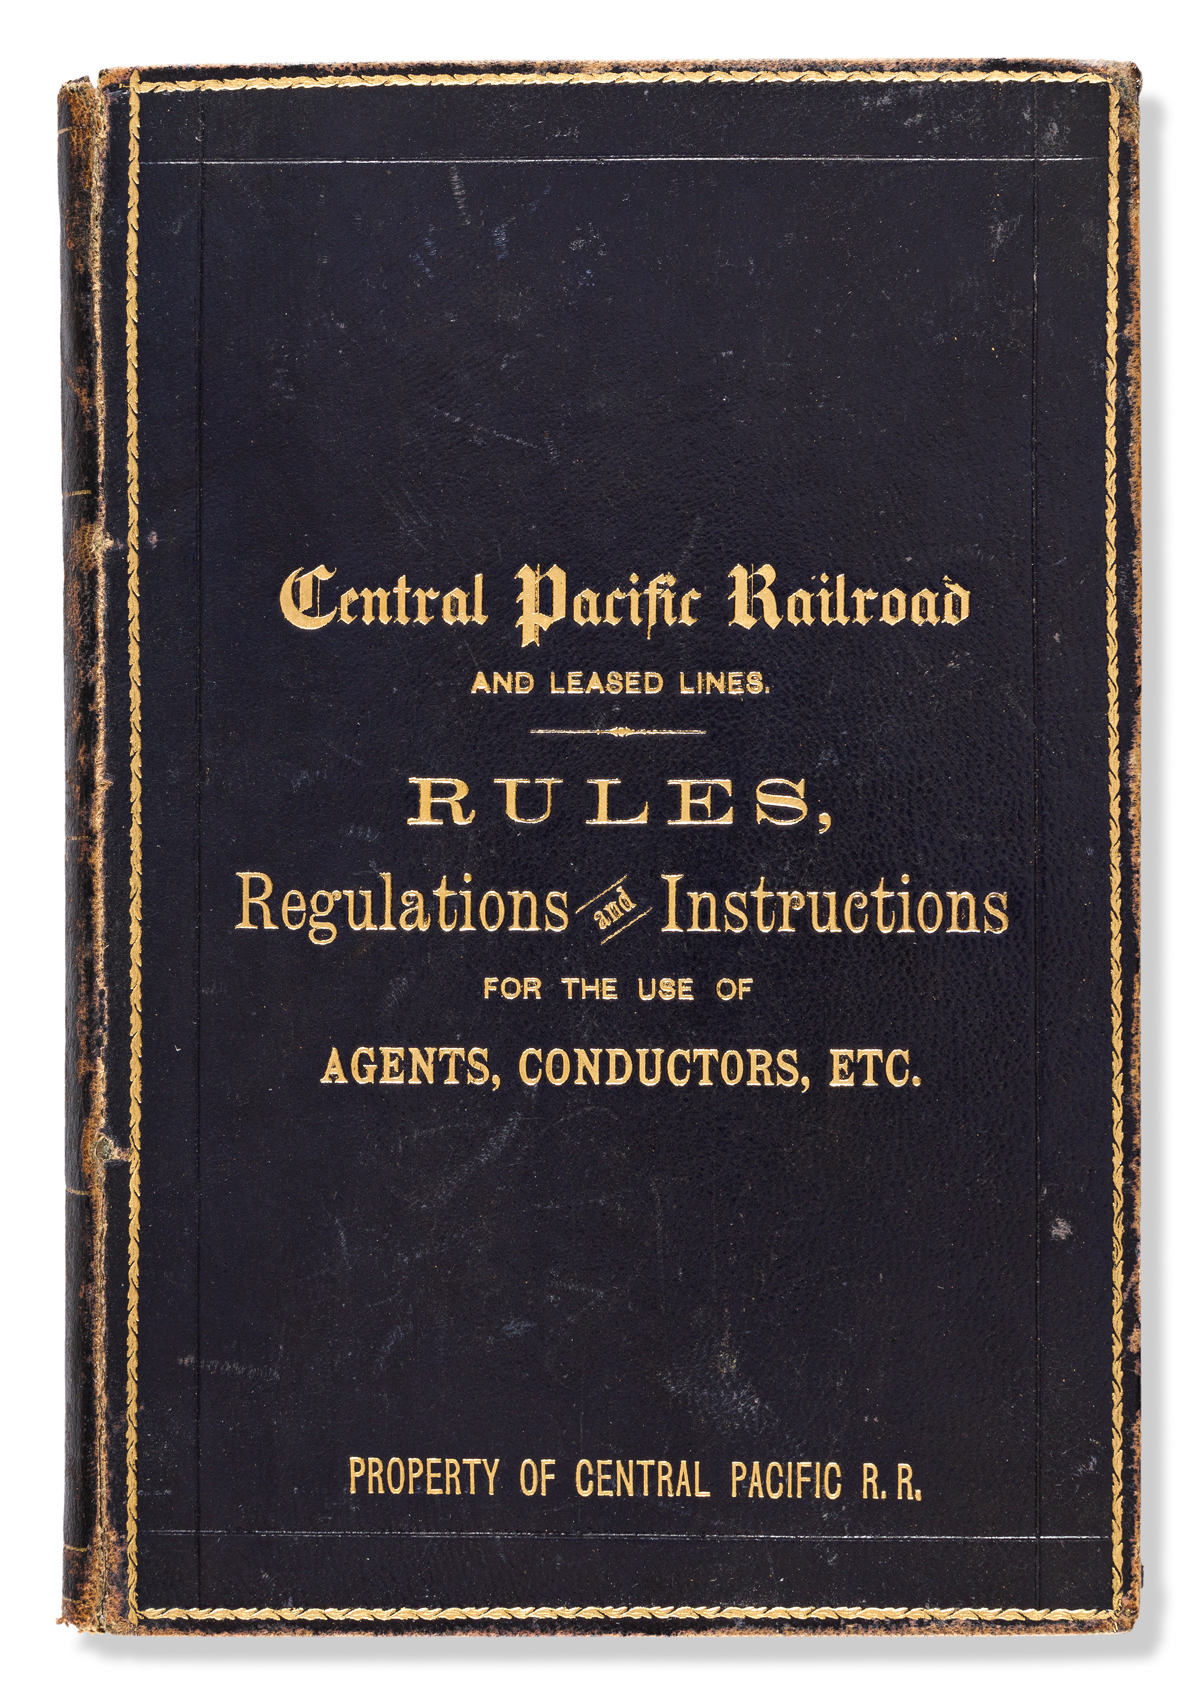 (RAILROADS.) Central Pacific Railroad and Leased Lines: Rules, Regulations and Instructions for the Use of Agents, Conductors, Etc.